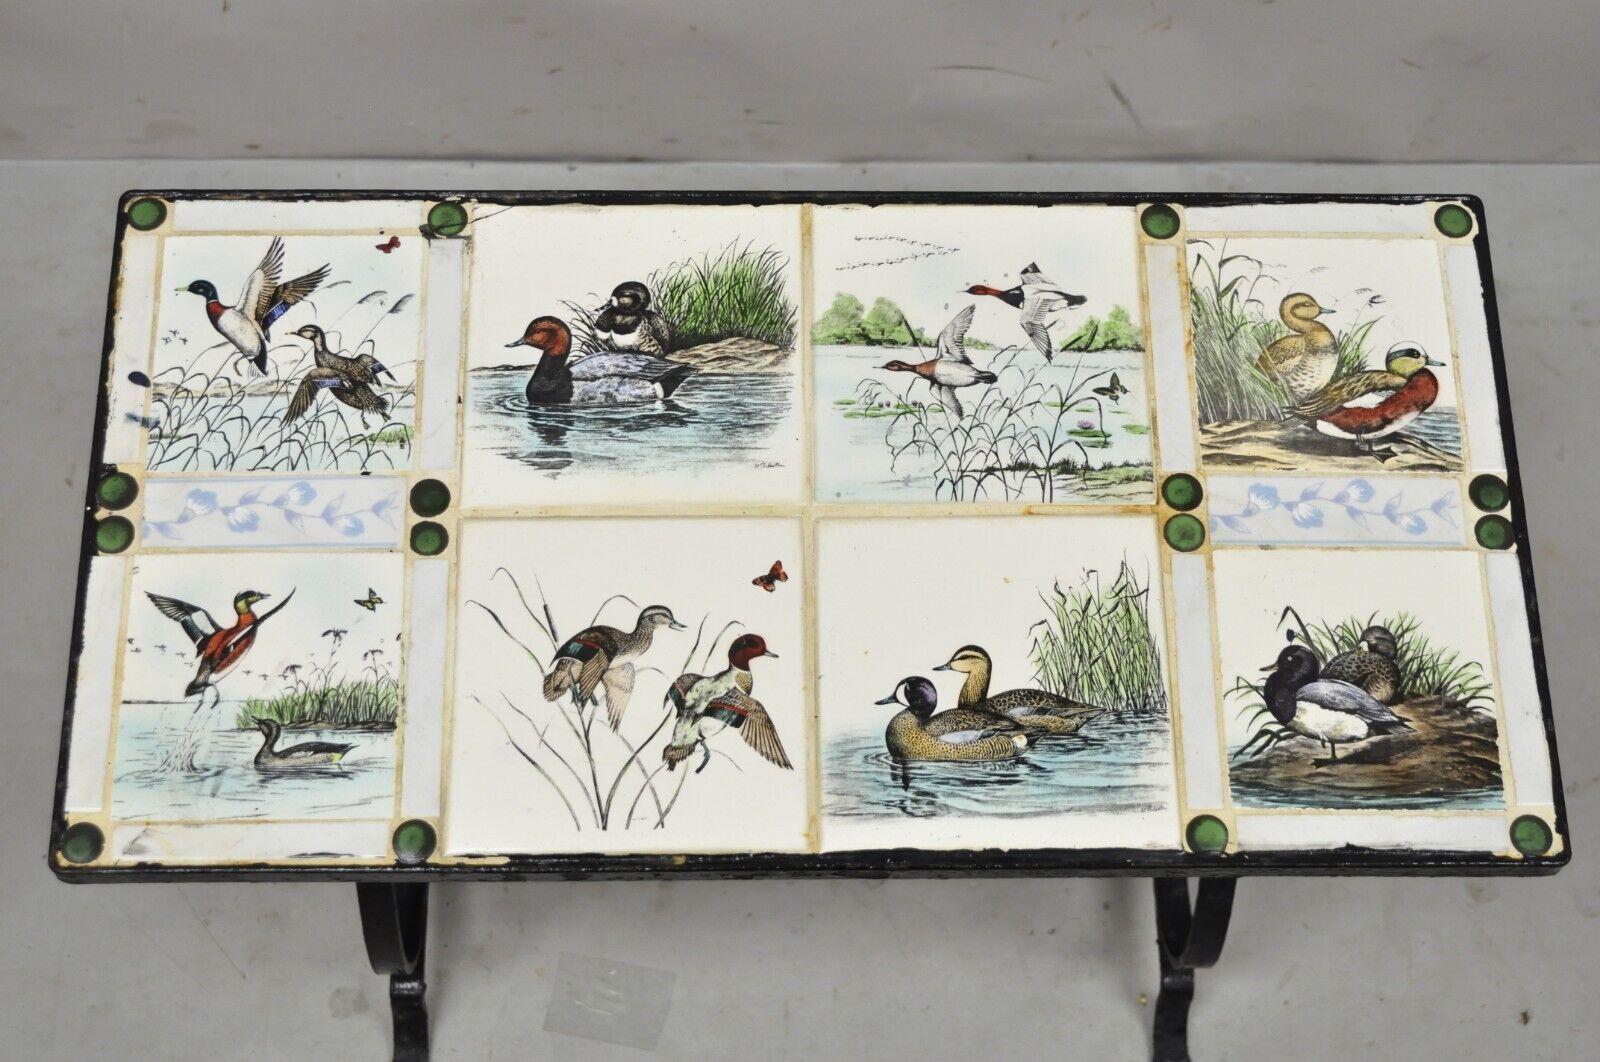 Antique Art Nouveau wrought iron small side table with duck geese tile top. Item features (8) Porcelain/ceramic decorative tiles with various duck/geese scenes, black wrought iron base, very nice antique item, great style and form, tiles signed by